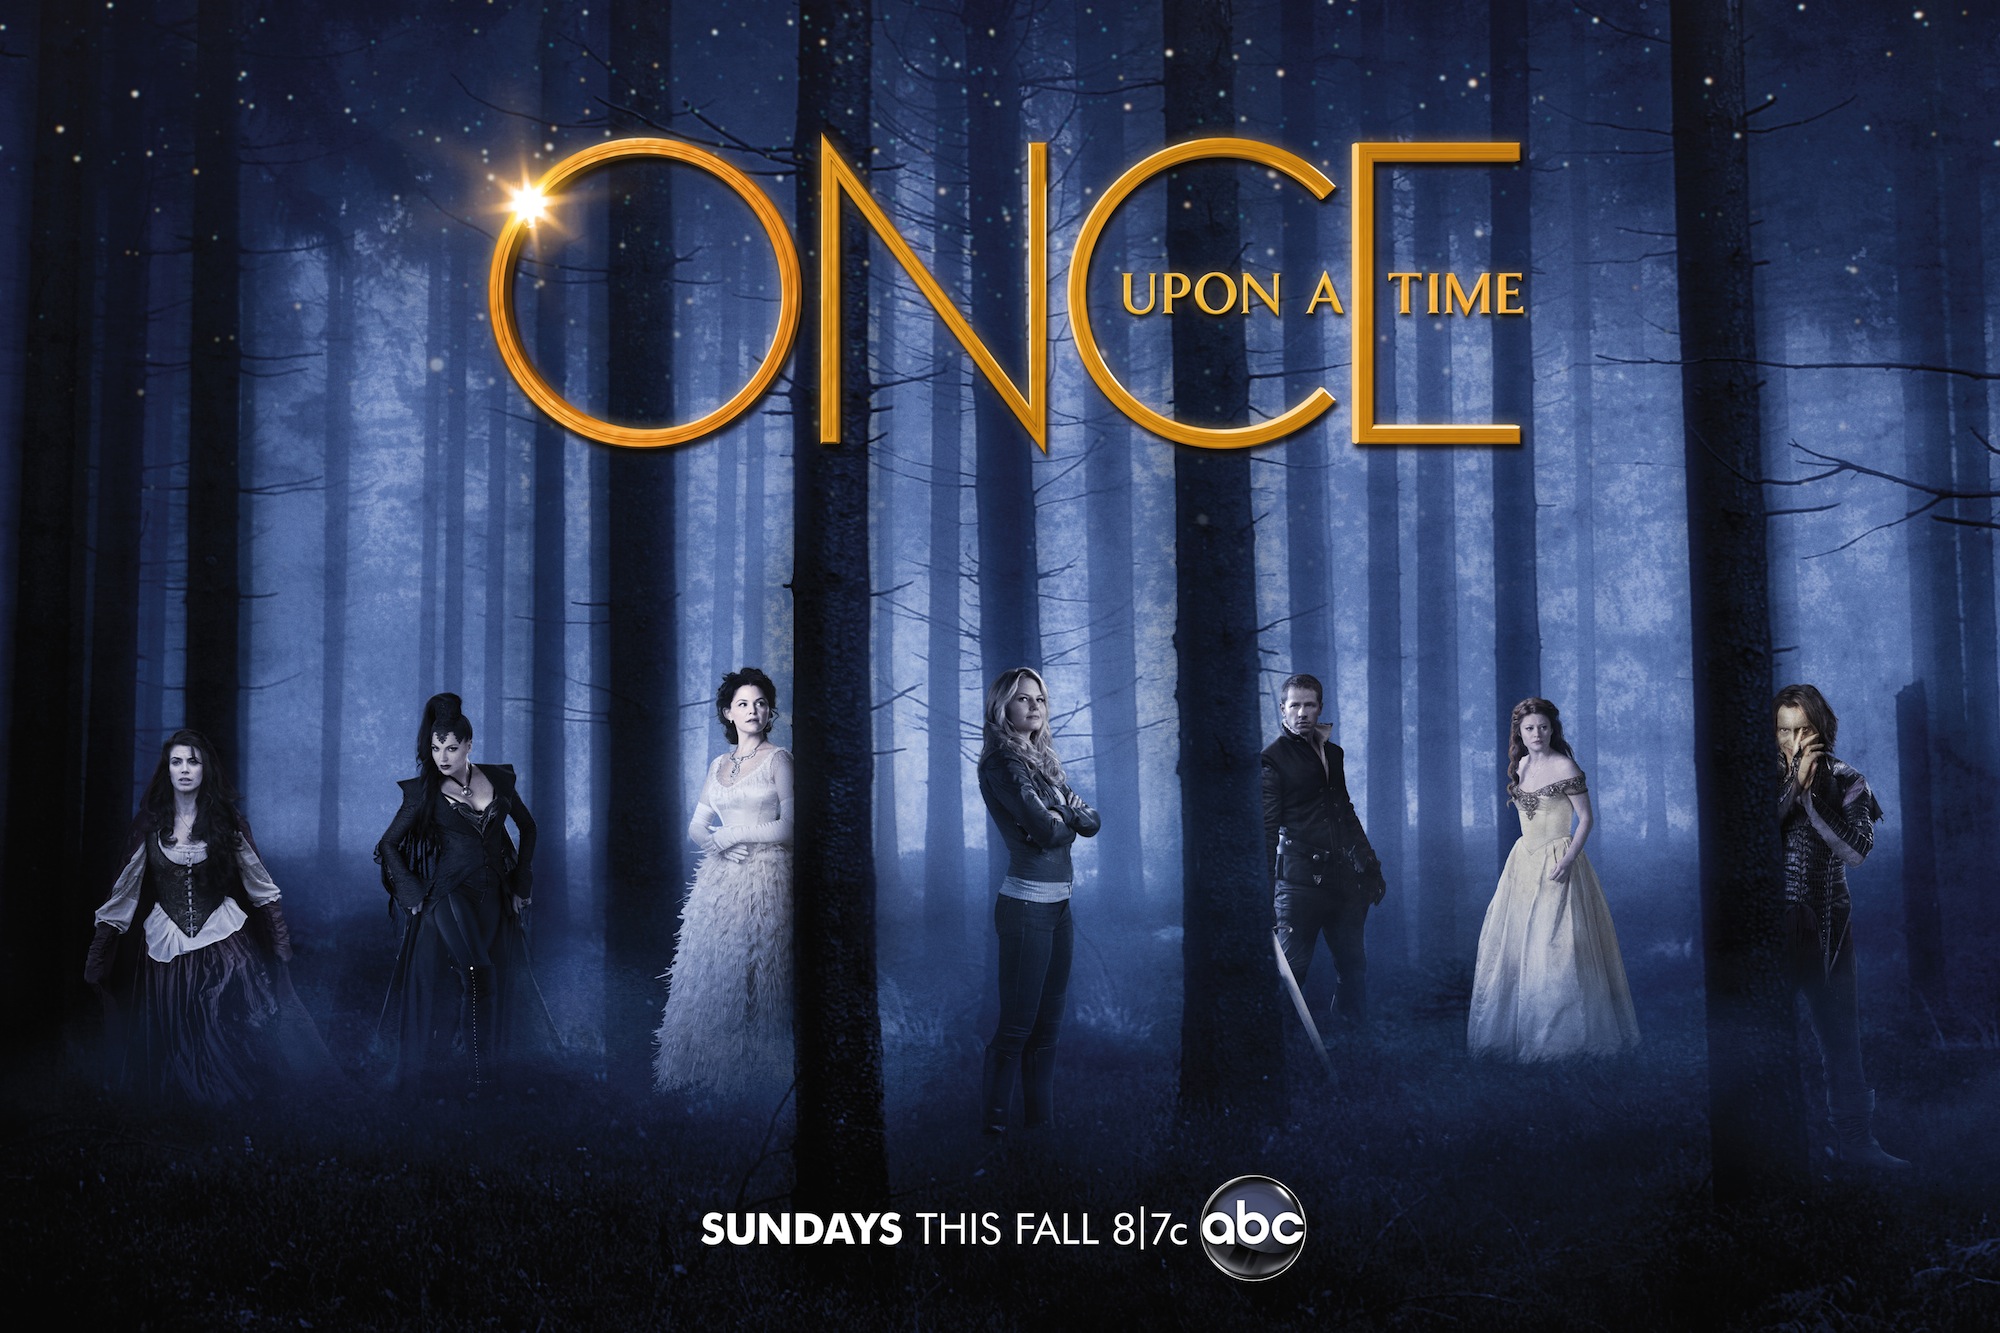 tv show, once upon a time, belle (once upon a time), emma swan, evil queen (once upon a time), fantasy, ginnifer goodwin, mr gold, prince charming (once upon a time), red riding hood (once upon a time), regina mills, robert carlyle, rumpelstiltskin, snow white (once upon a time)